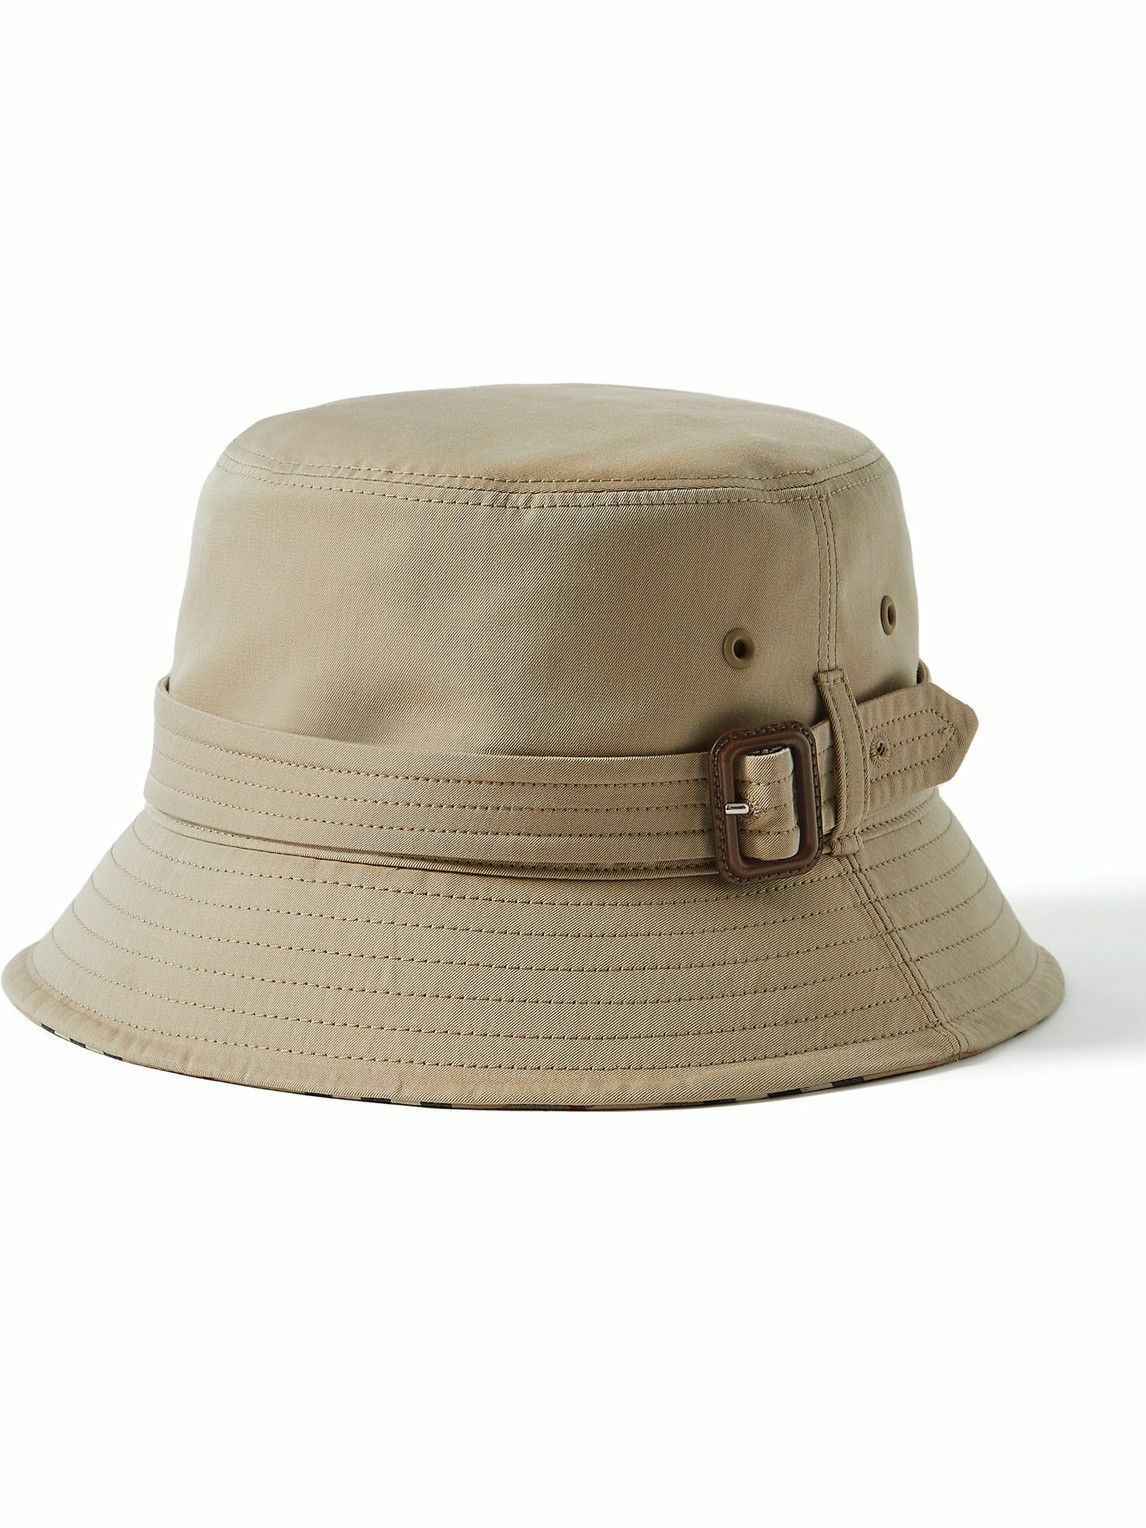 Burberry - Leather-Trimmed Cotton-Twill Bucket Hat - Neutrals Burberry